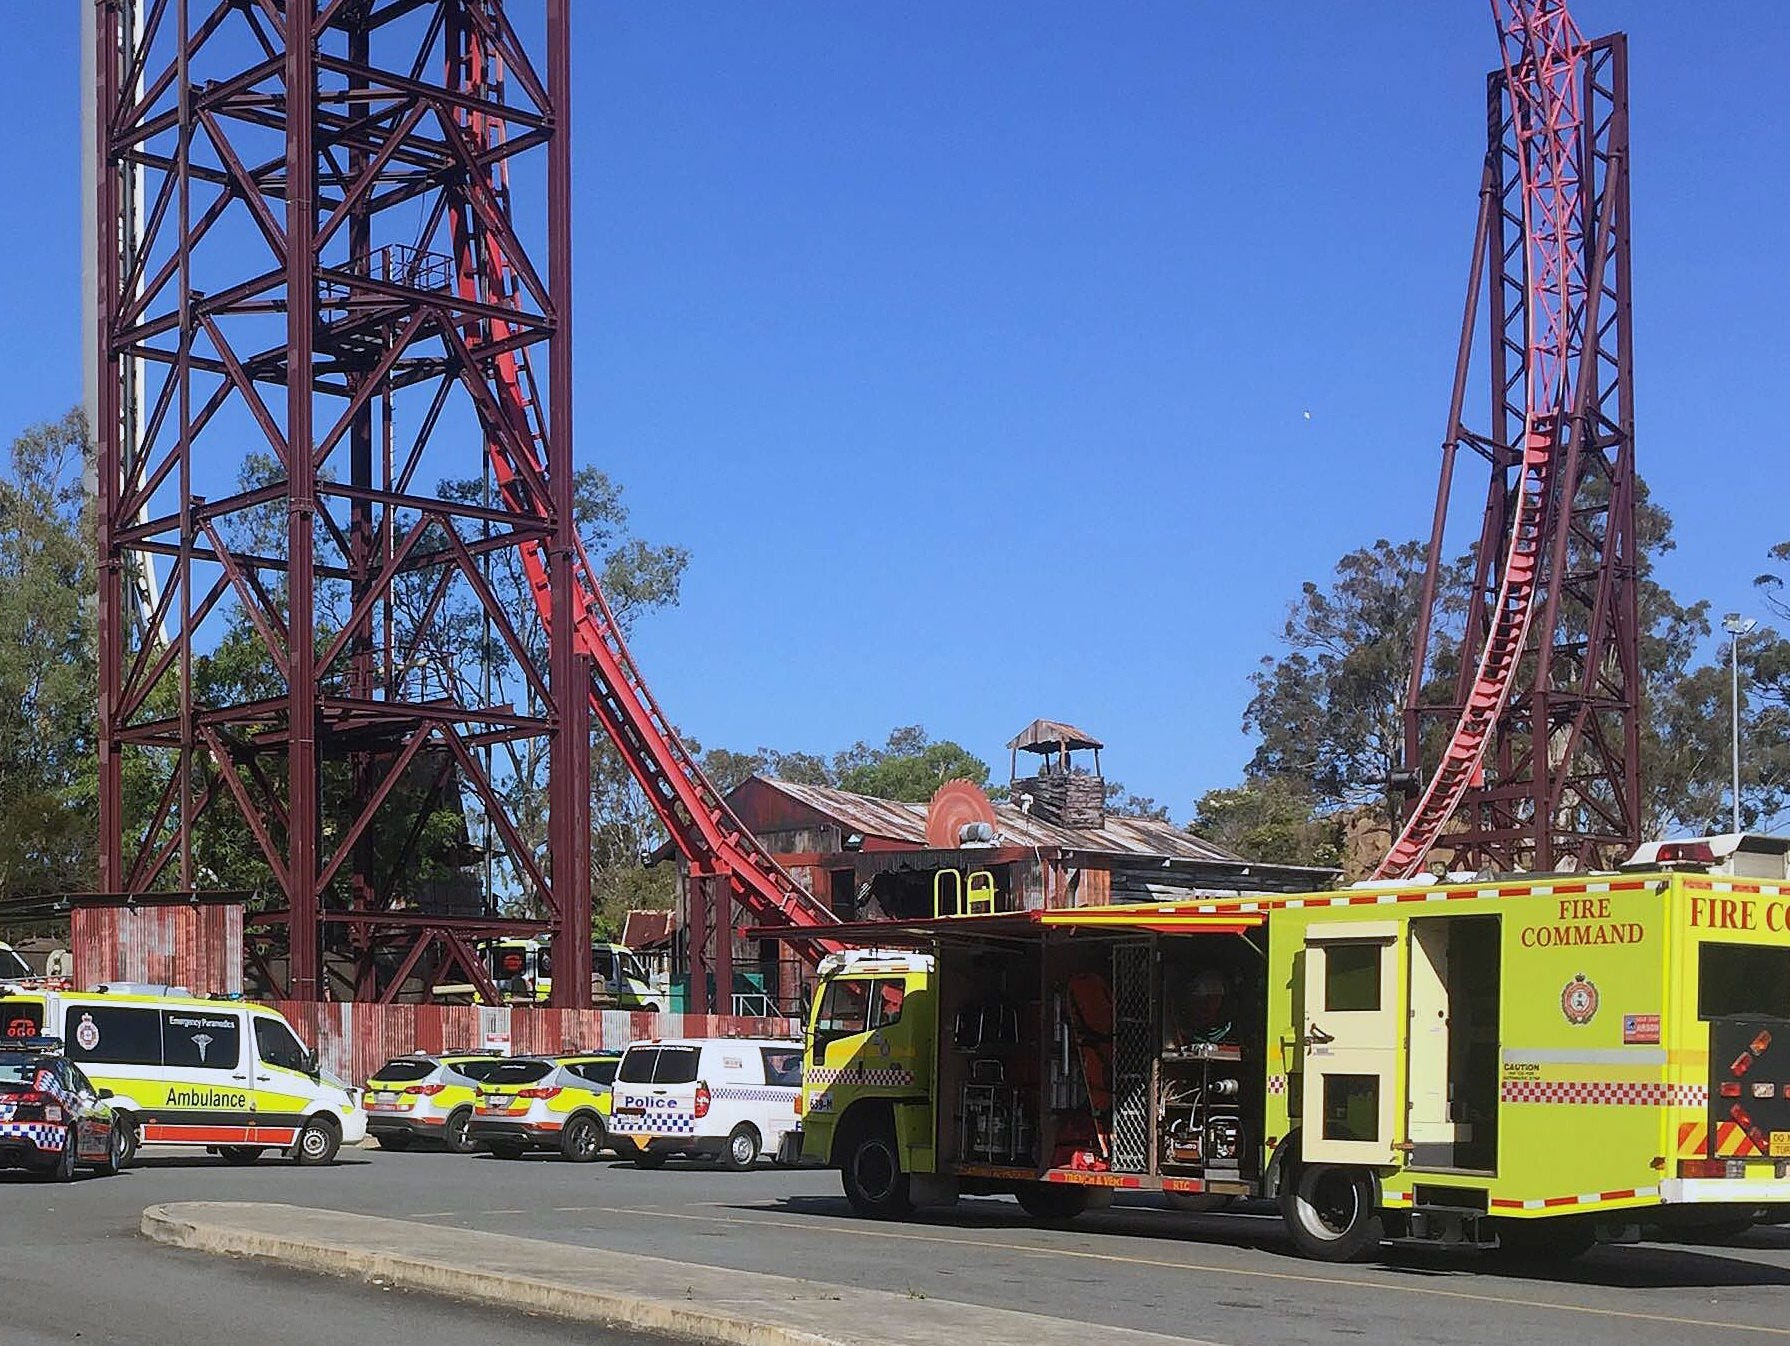 Emergency services vehicles are seen outside the Dreamworld theme park at Coomera on the Gold Coast, Queensland, Australia, Oct. 25, 2016.